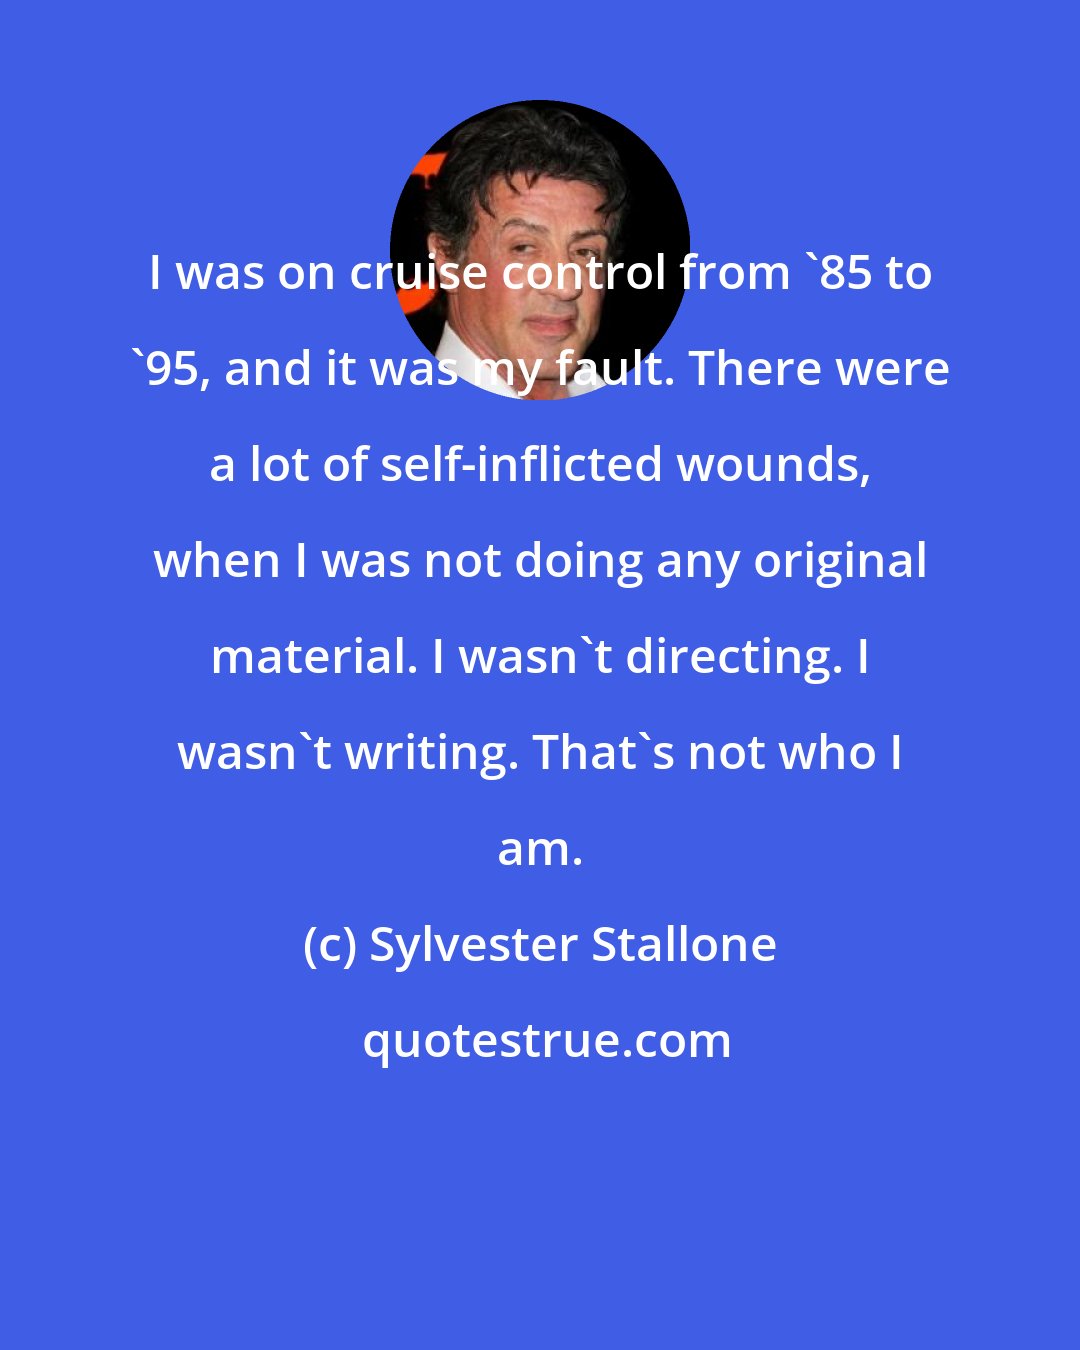 Sylvester Stallone: I was on cruise control from '85 to '95, and it was my fault. There were a lot of self-inflicted wounds, when I was not doing any original material. I wasn't directing. I wasn't writing. That's not who I am.